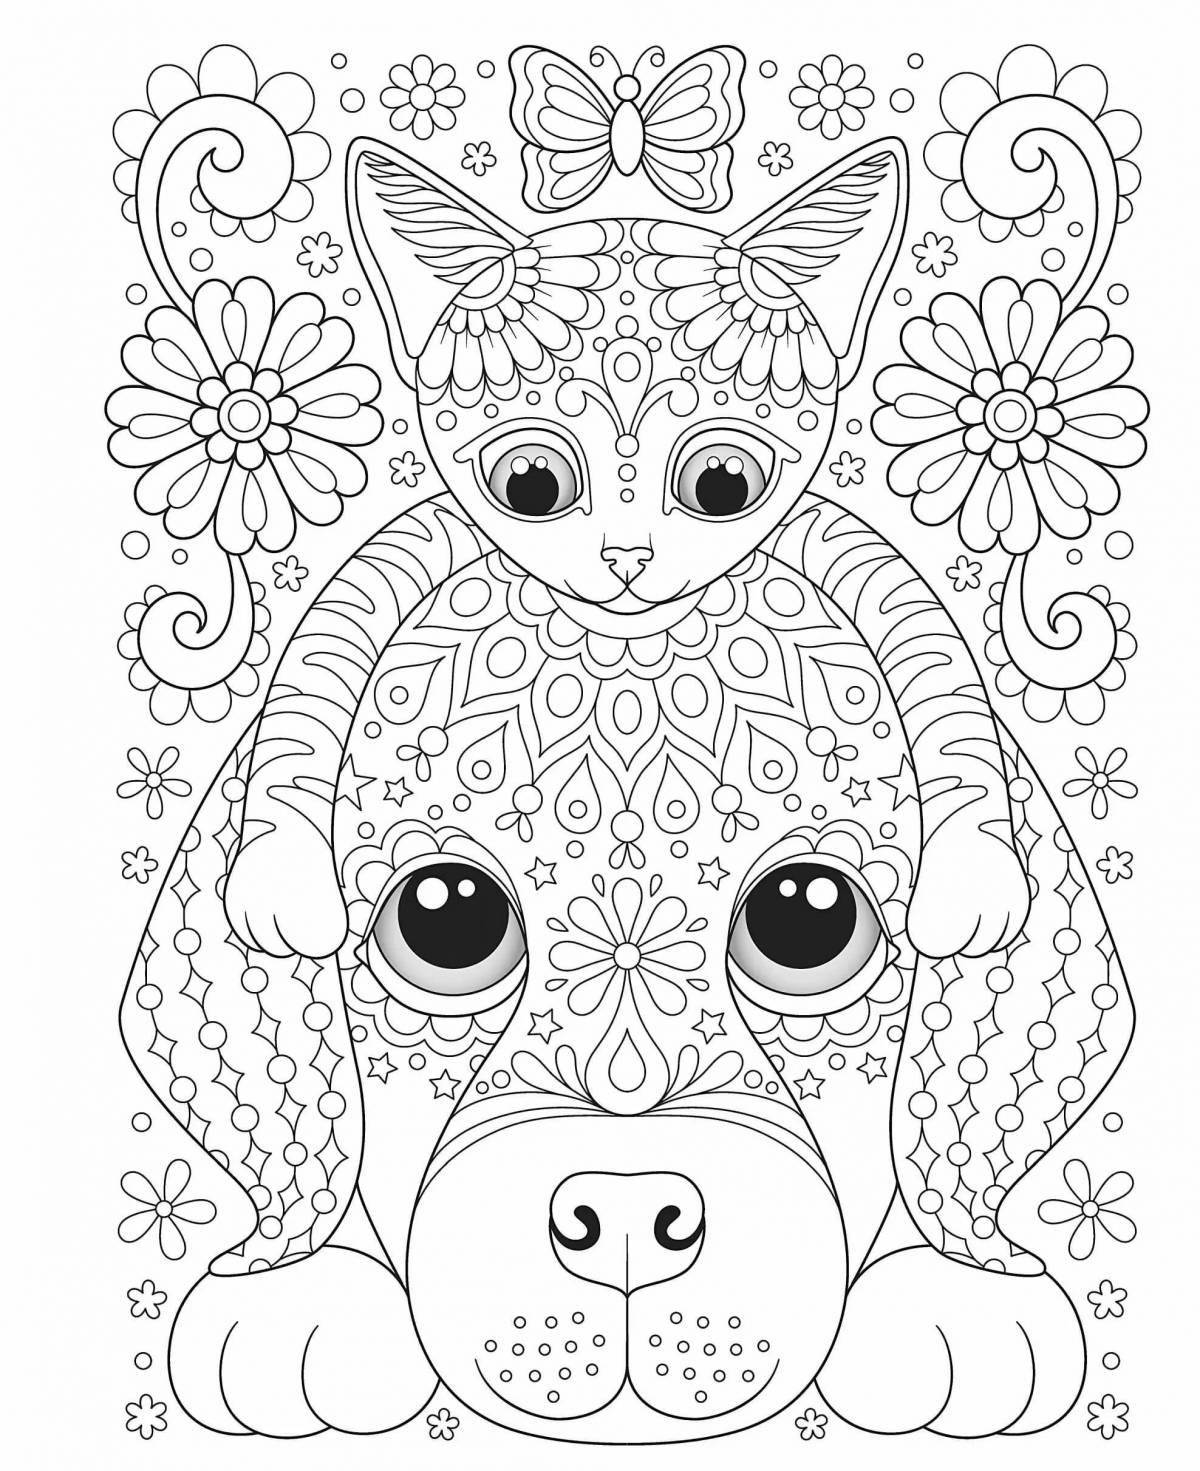 Inspiring simple pencil antistress coloring page